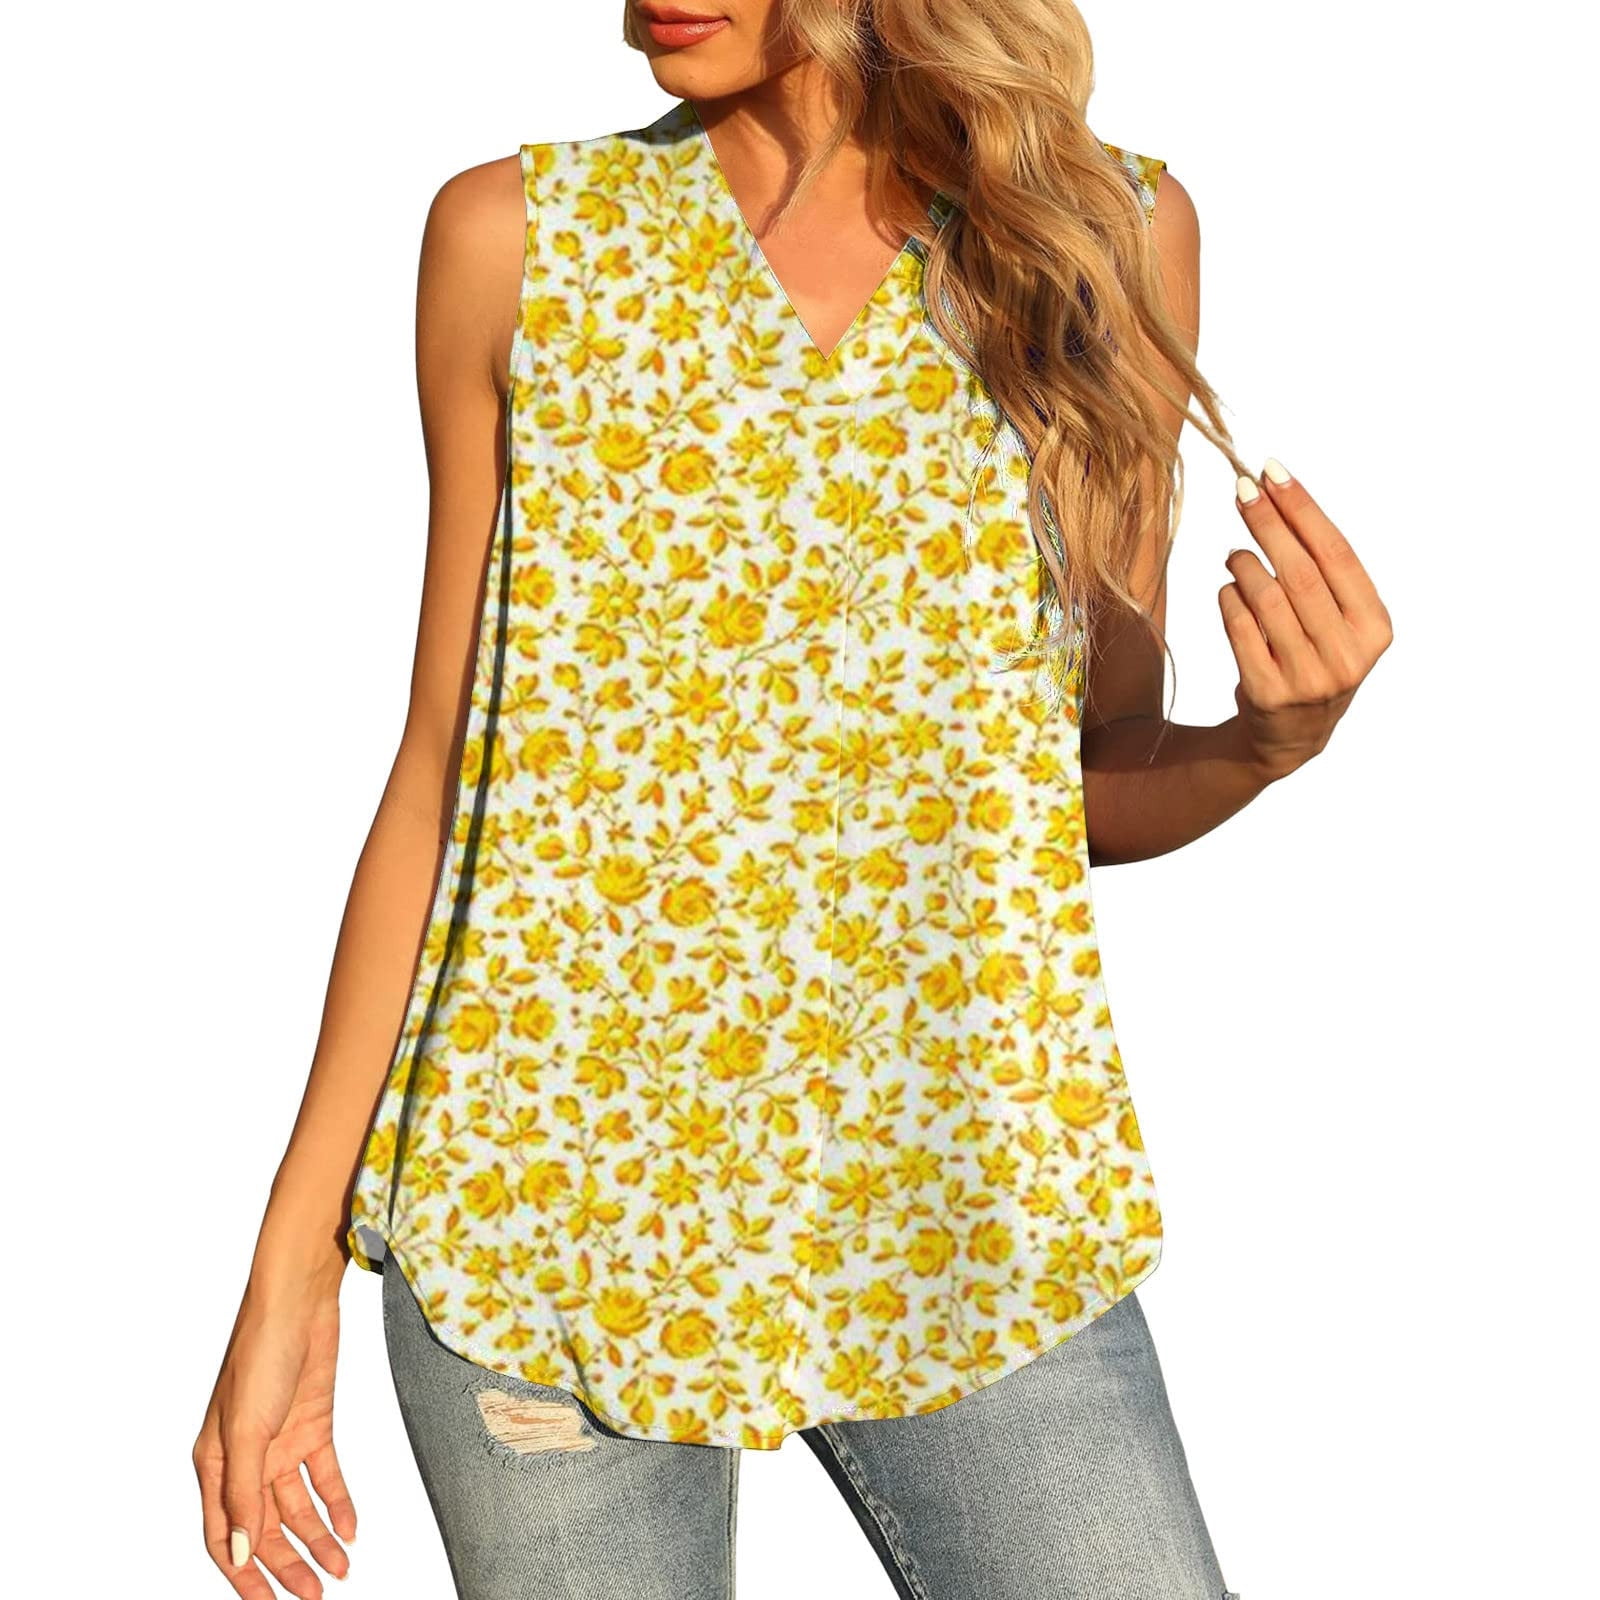 Womens Summer Flowy Sleeveless Tunic Swing Shirts Casual Comfy V-Neck Floral Print Tank Tops 